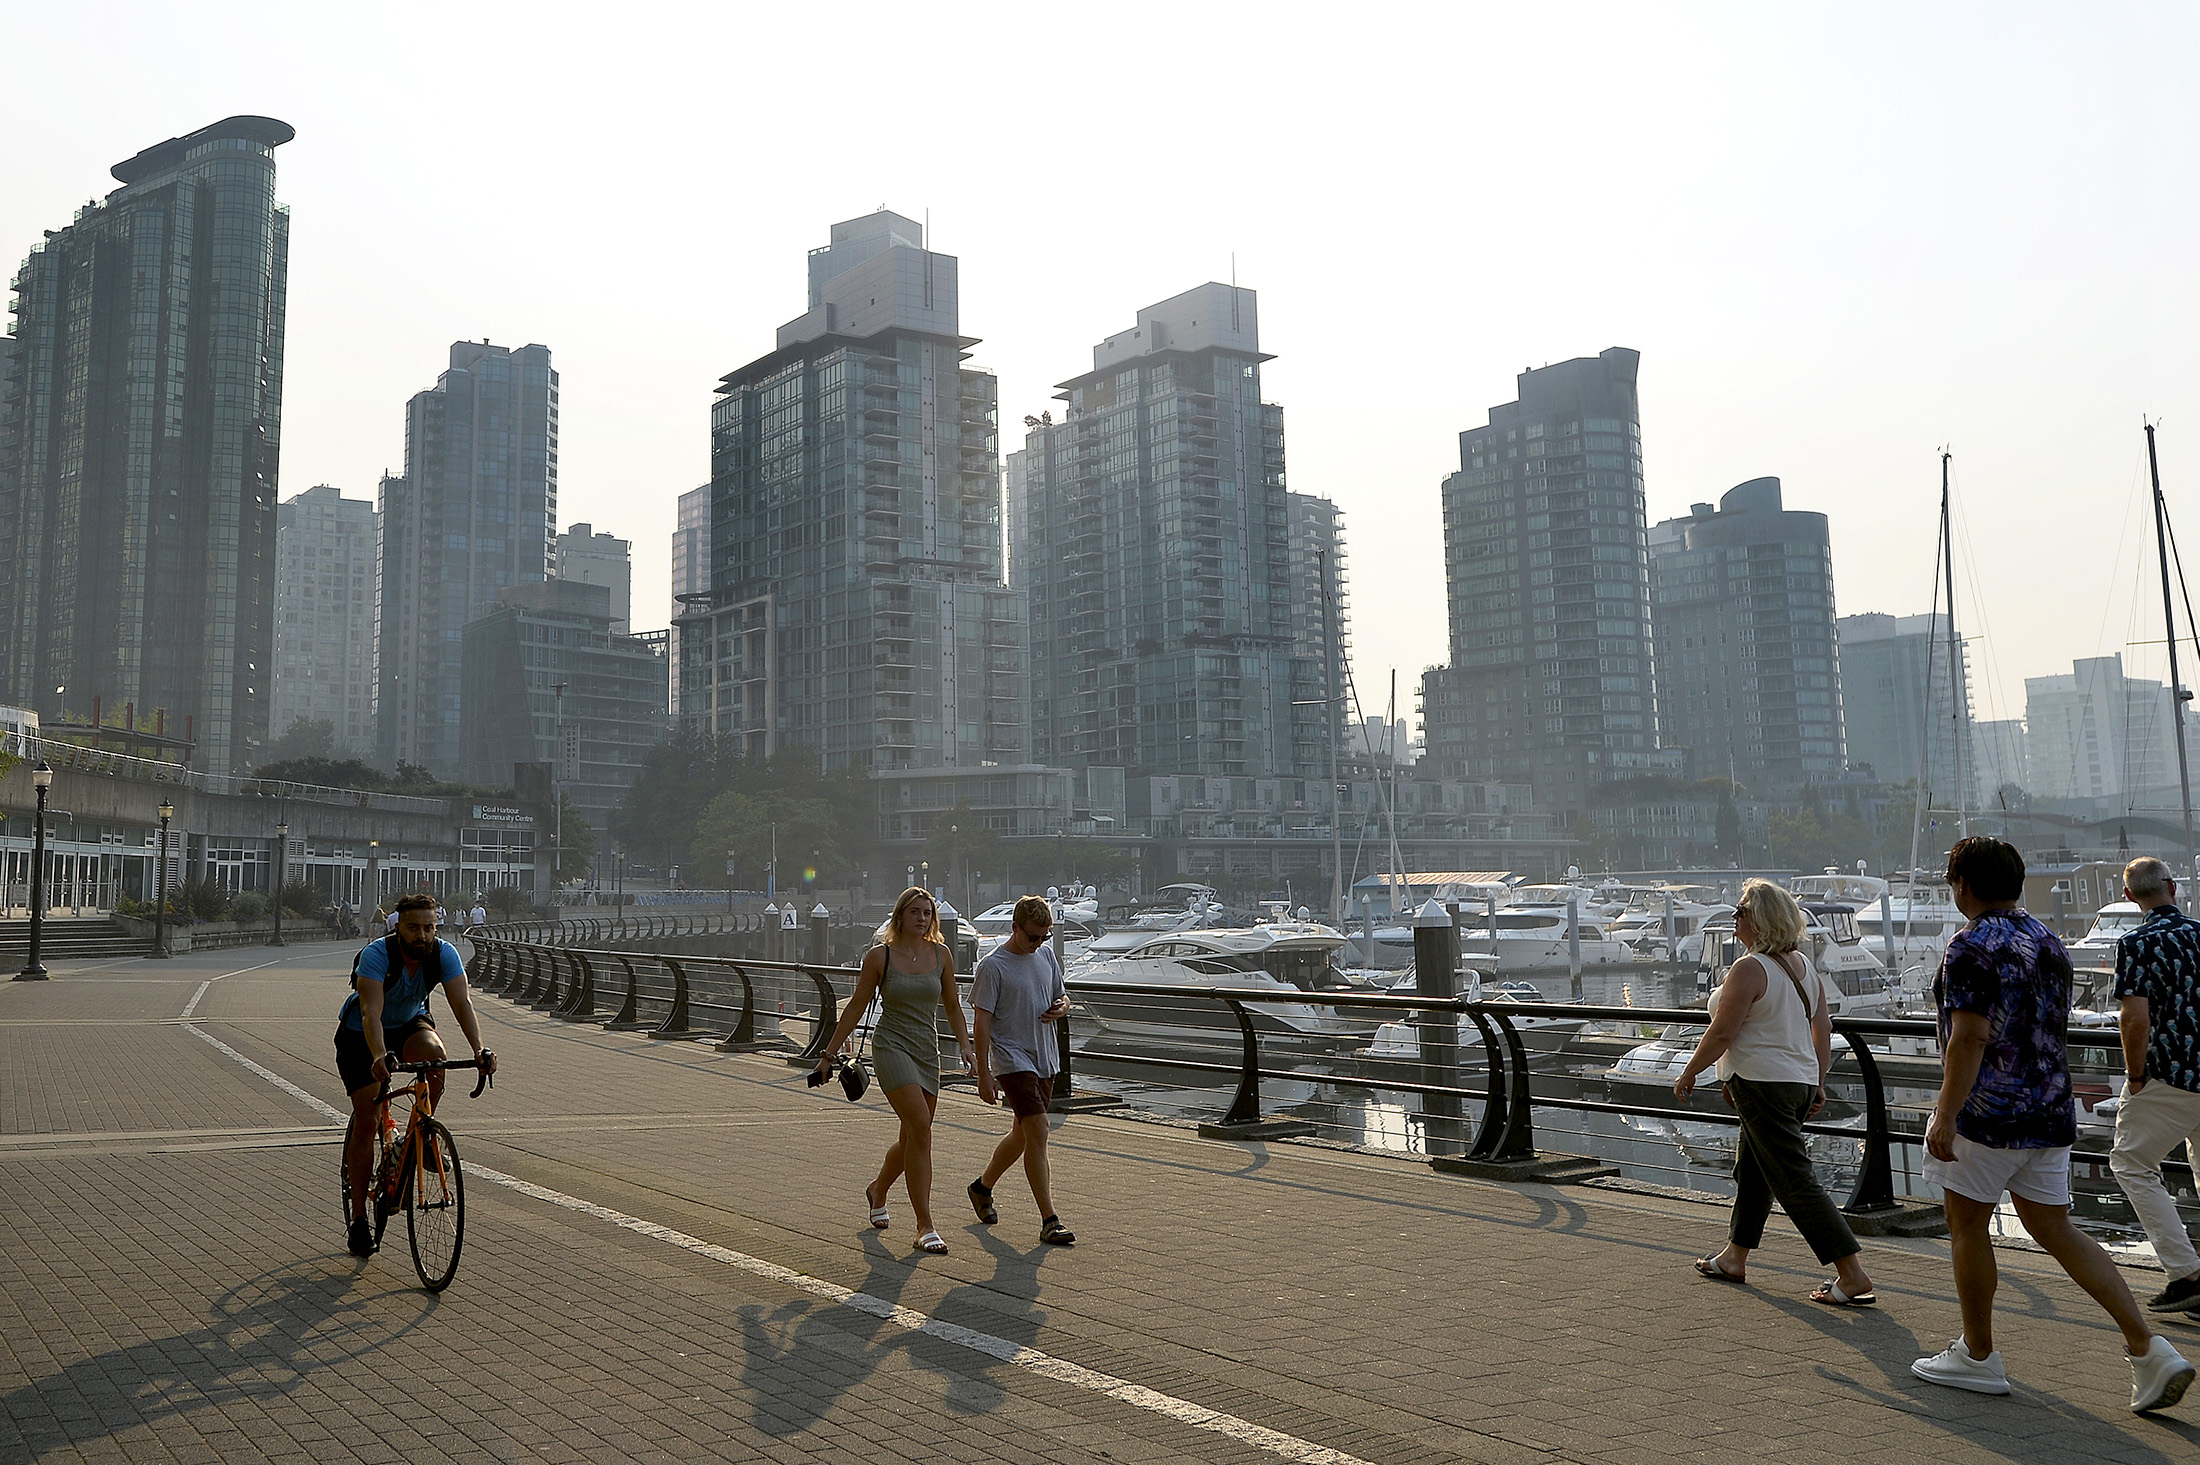 Coal Harbour&nbsp;in Vancouver,&nbsp;Canada, the first North American city to implement a tax on empty homes.&nbsp;